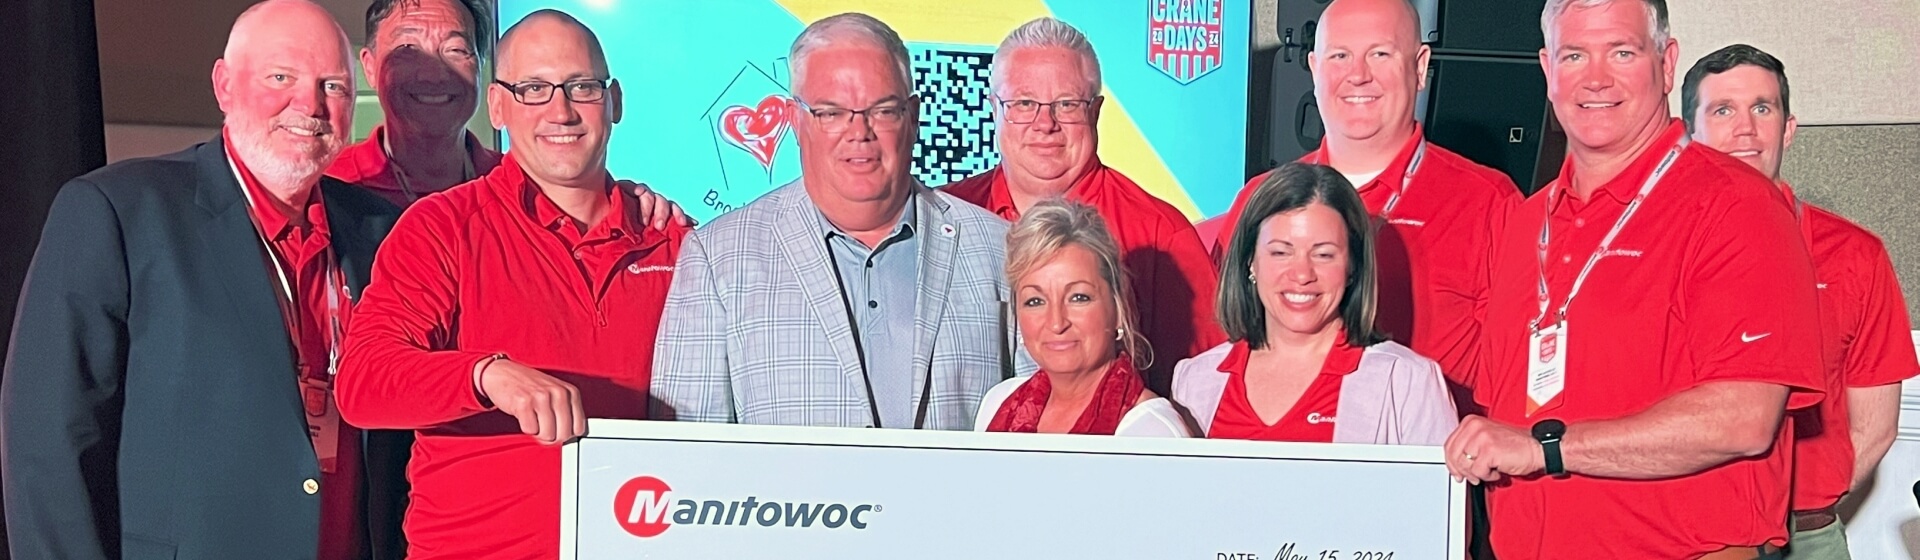 Brookes-House-receives-150K-donation-from-Manitowoc-and partners.jpg